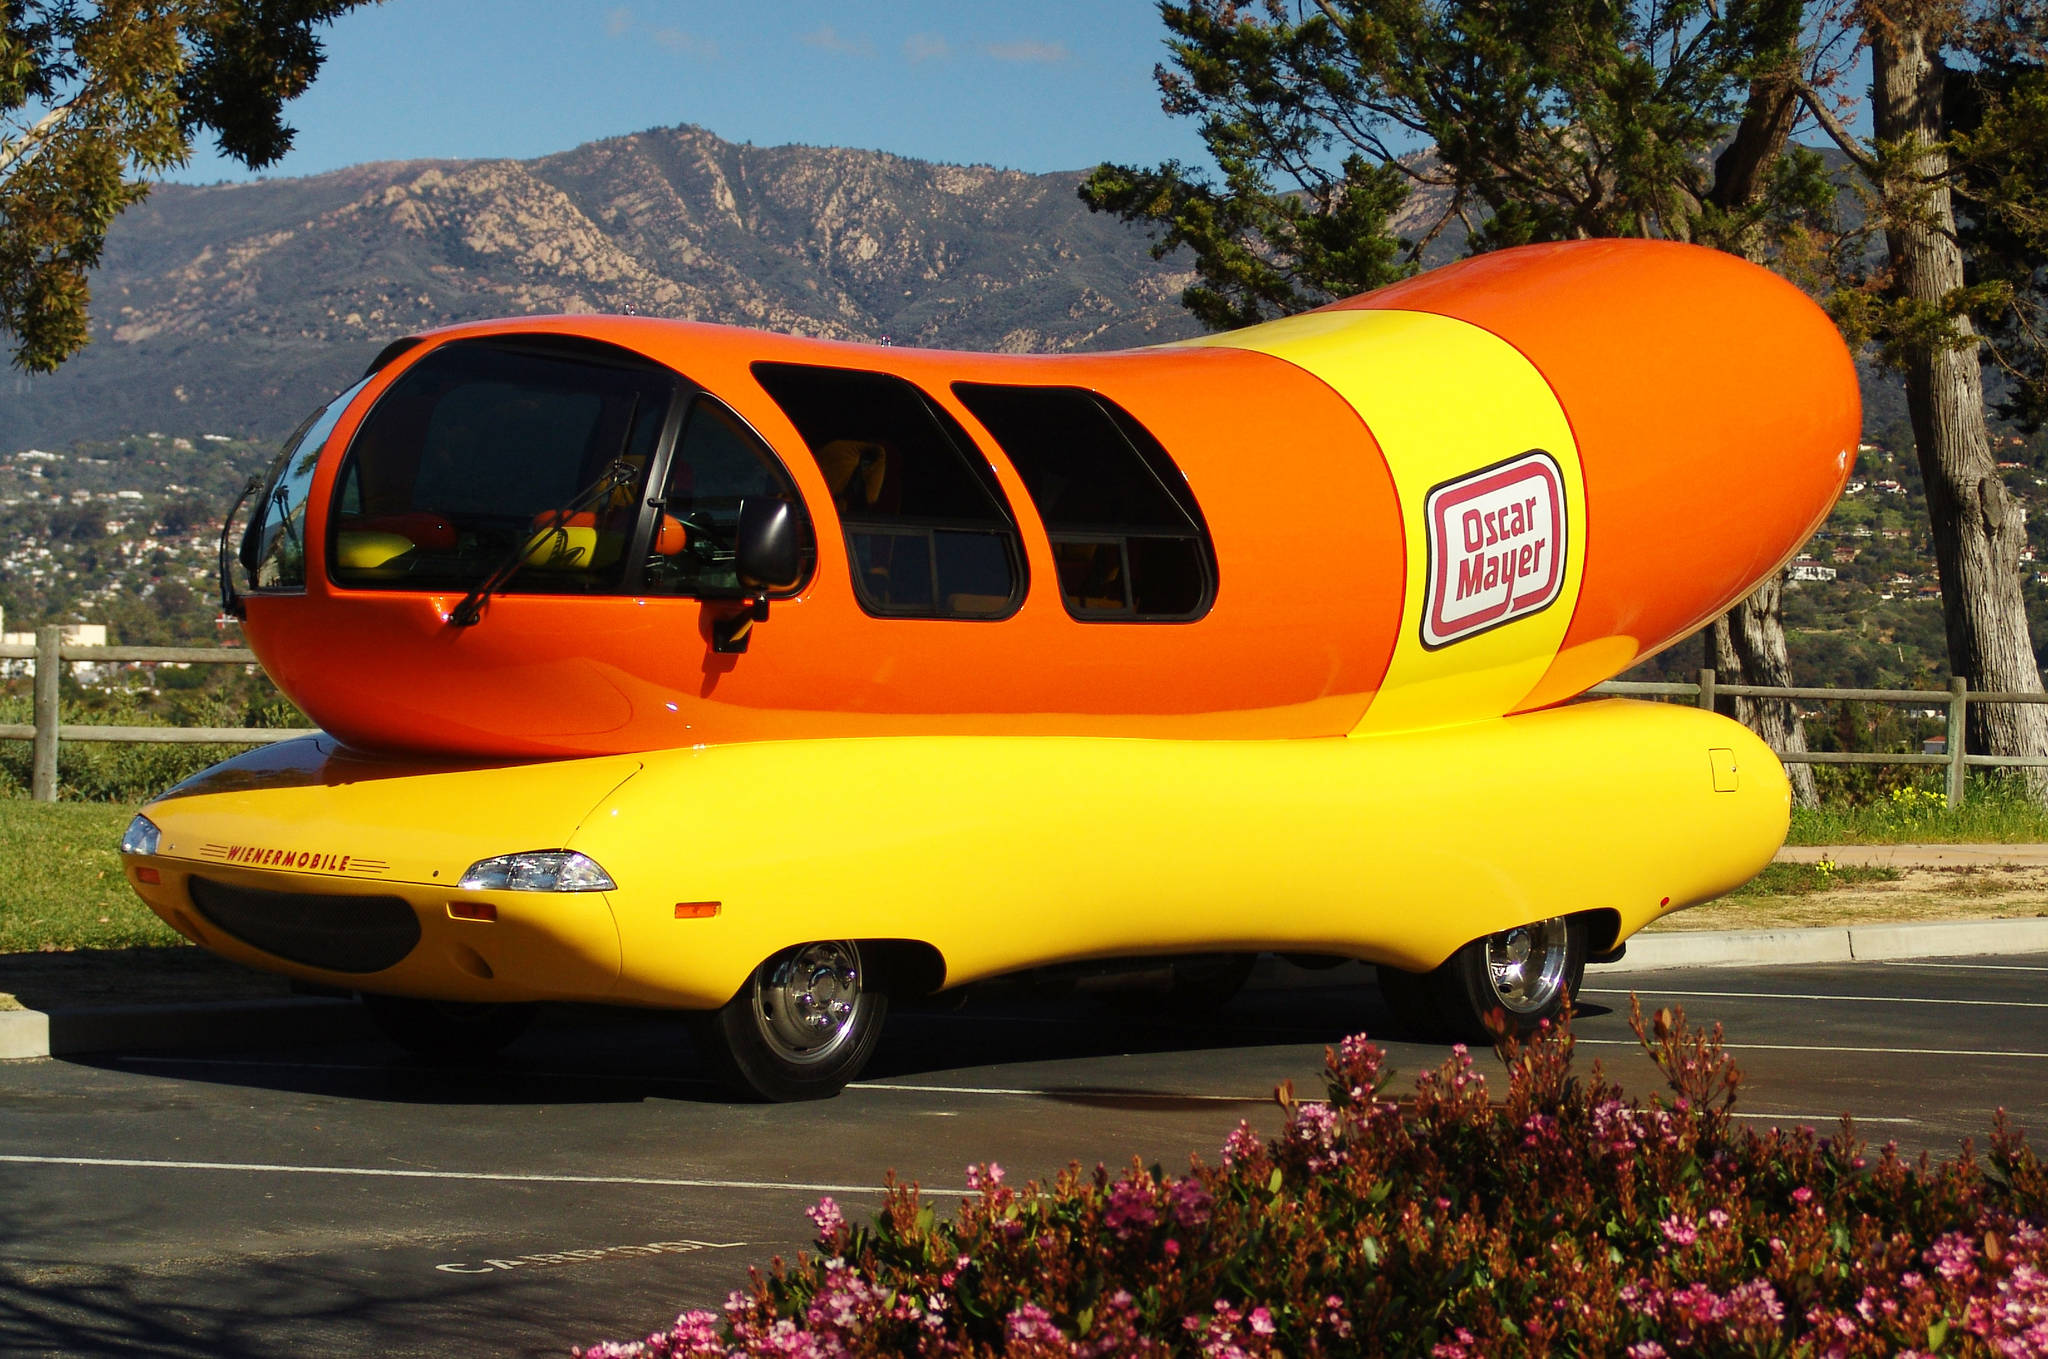 The Oscar Mayer Wienermobile will be at Kent Station from 10 a.m. to 2 p.m. on Friday, April 30 to help promote blood donations needed by Bloodworks Northwest. COURTESY PHOTO, Oscar Mayer